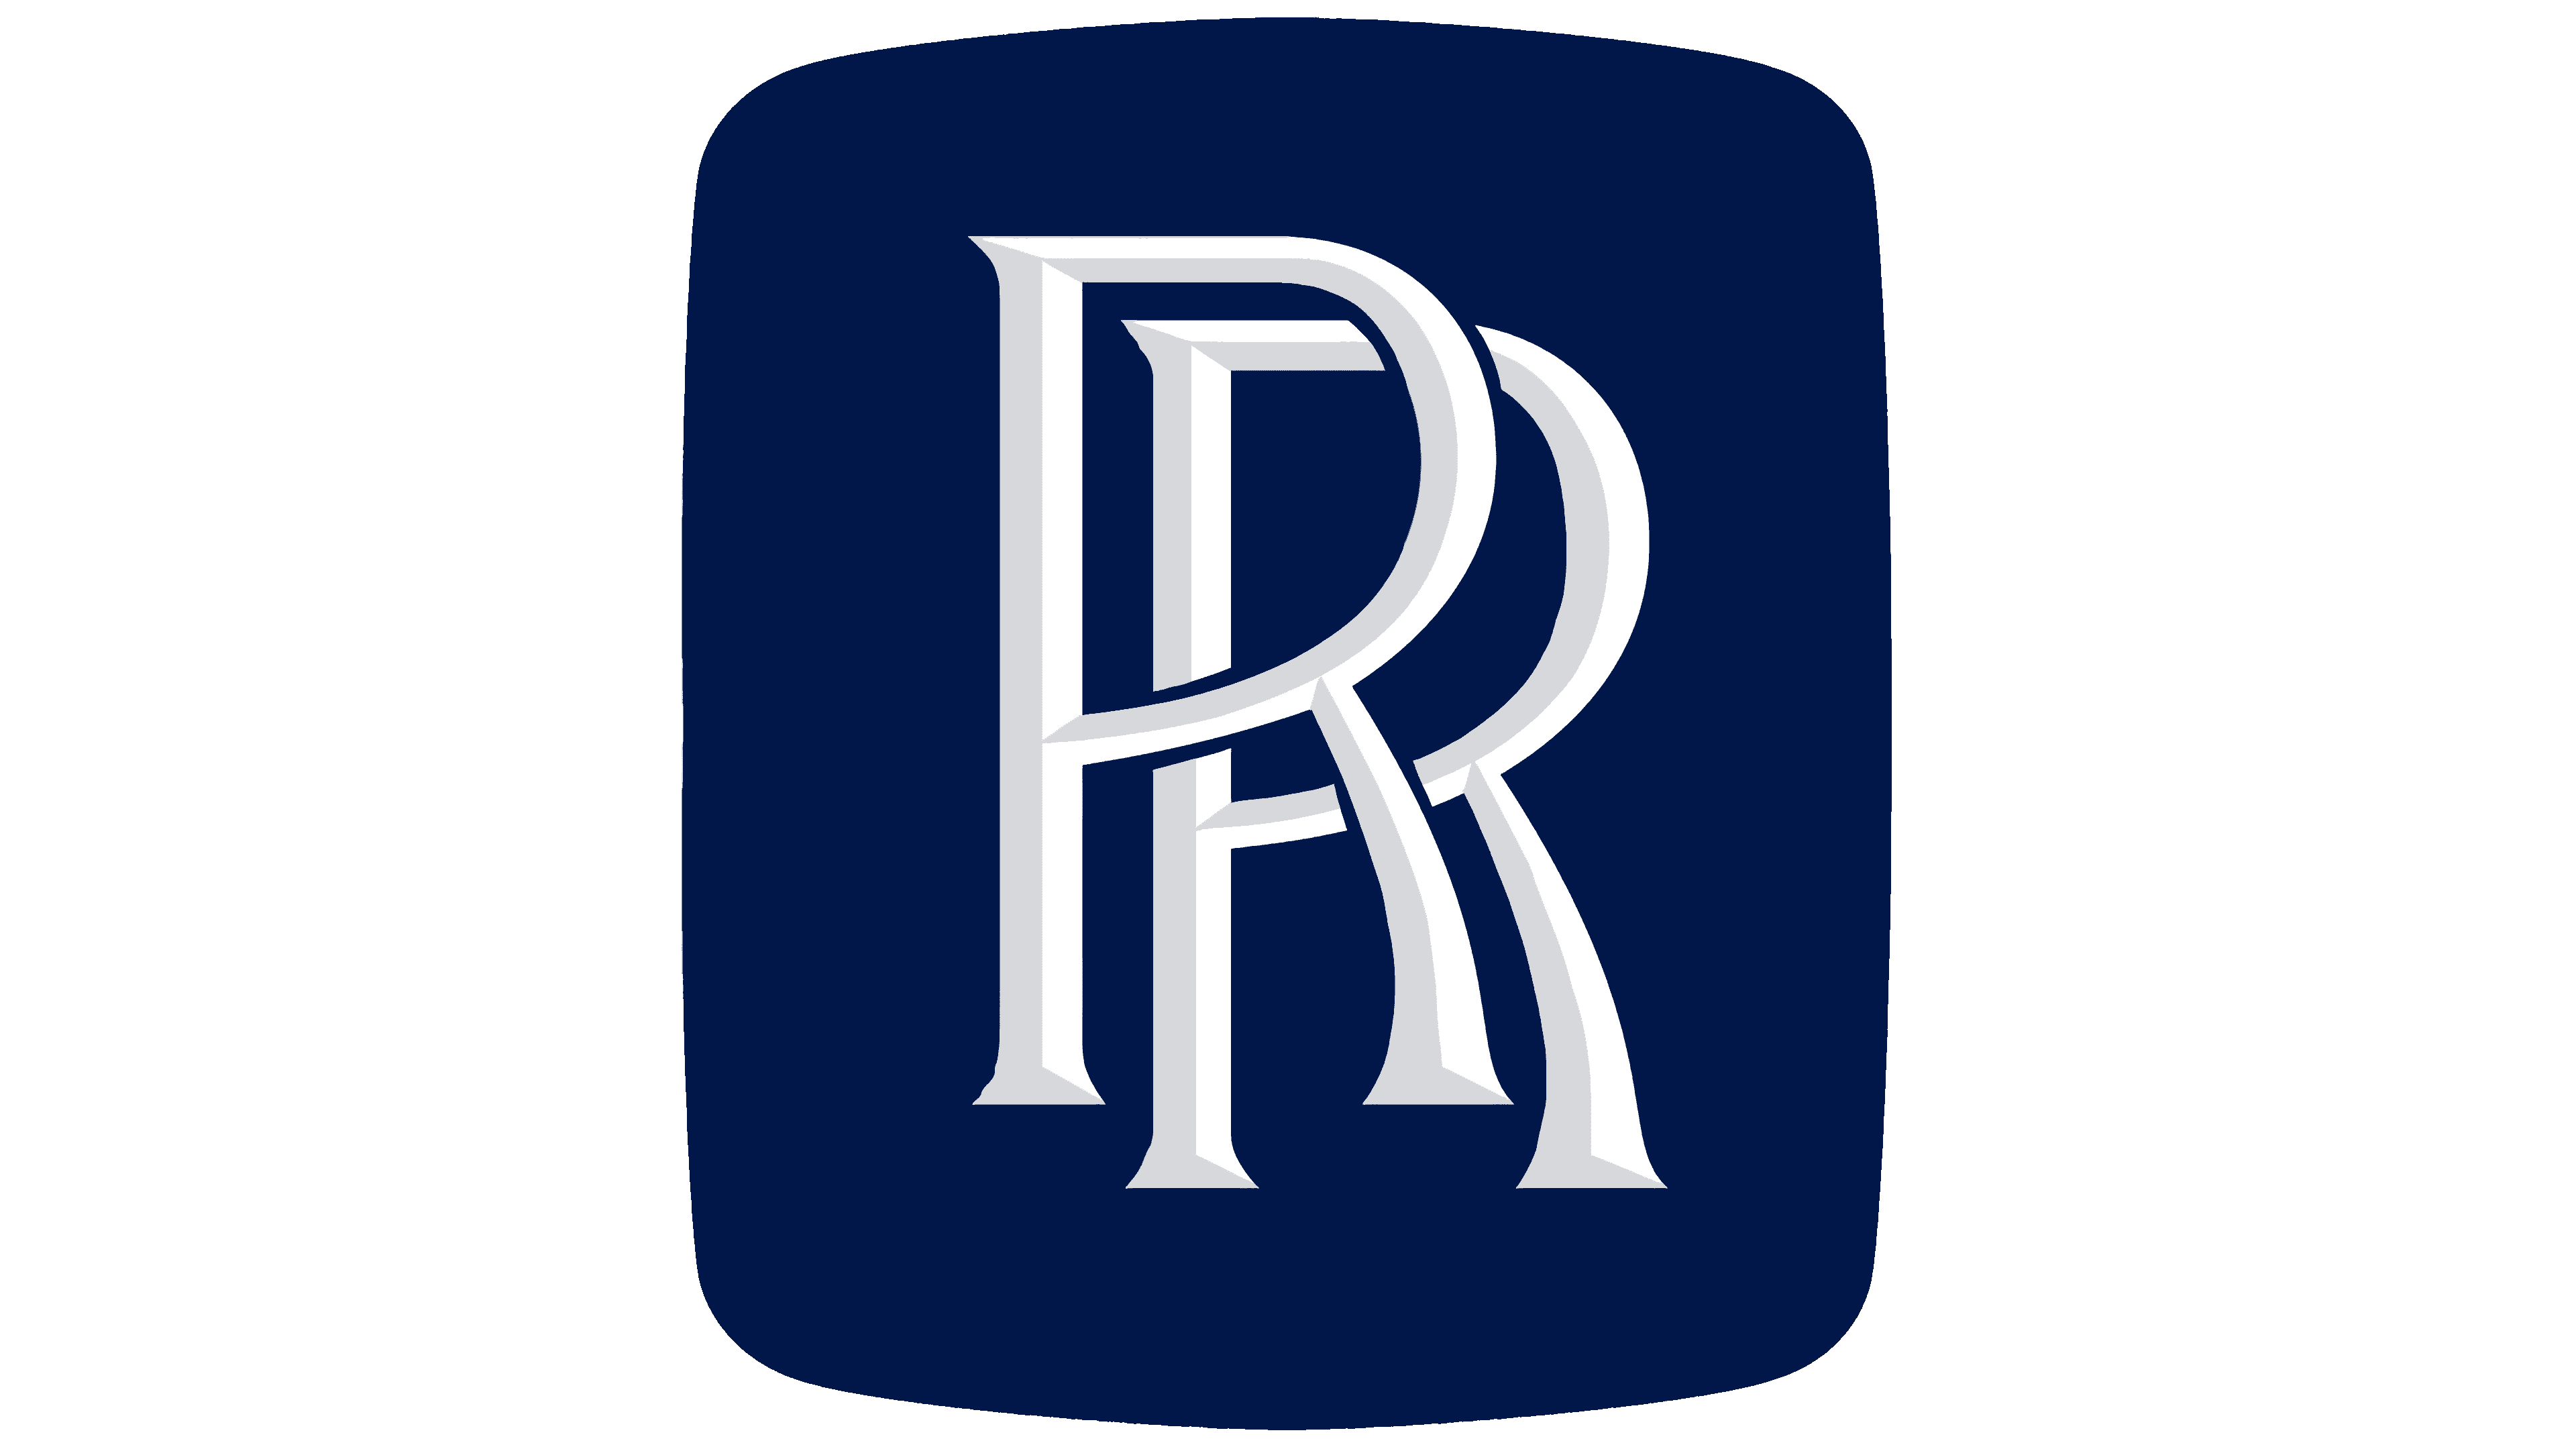 Rolls Royce Logo Symbol Meaning History PNG Brand